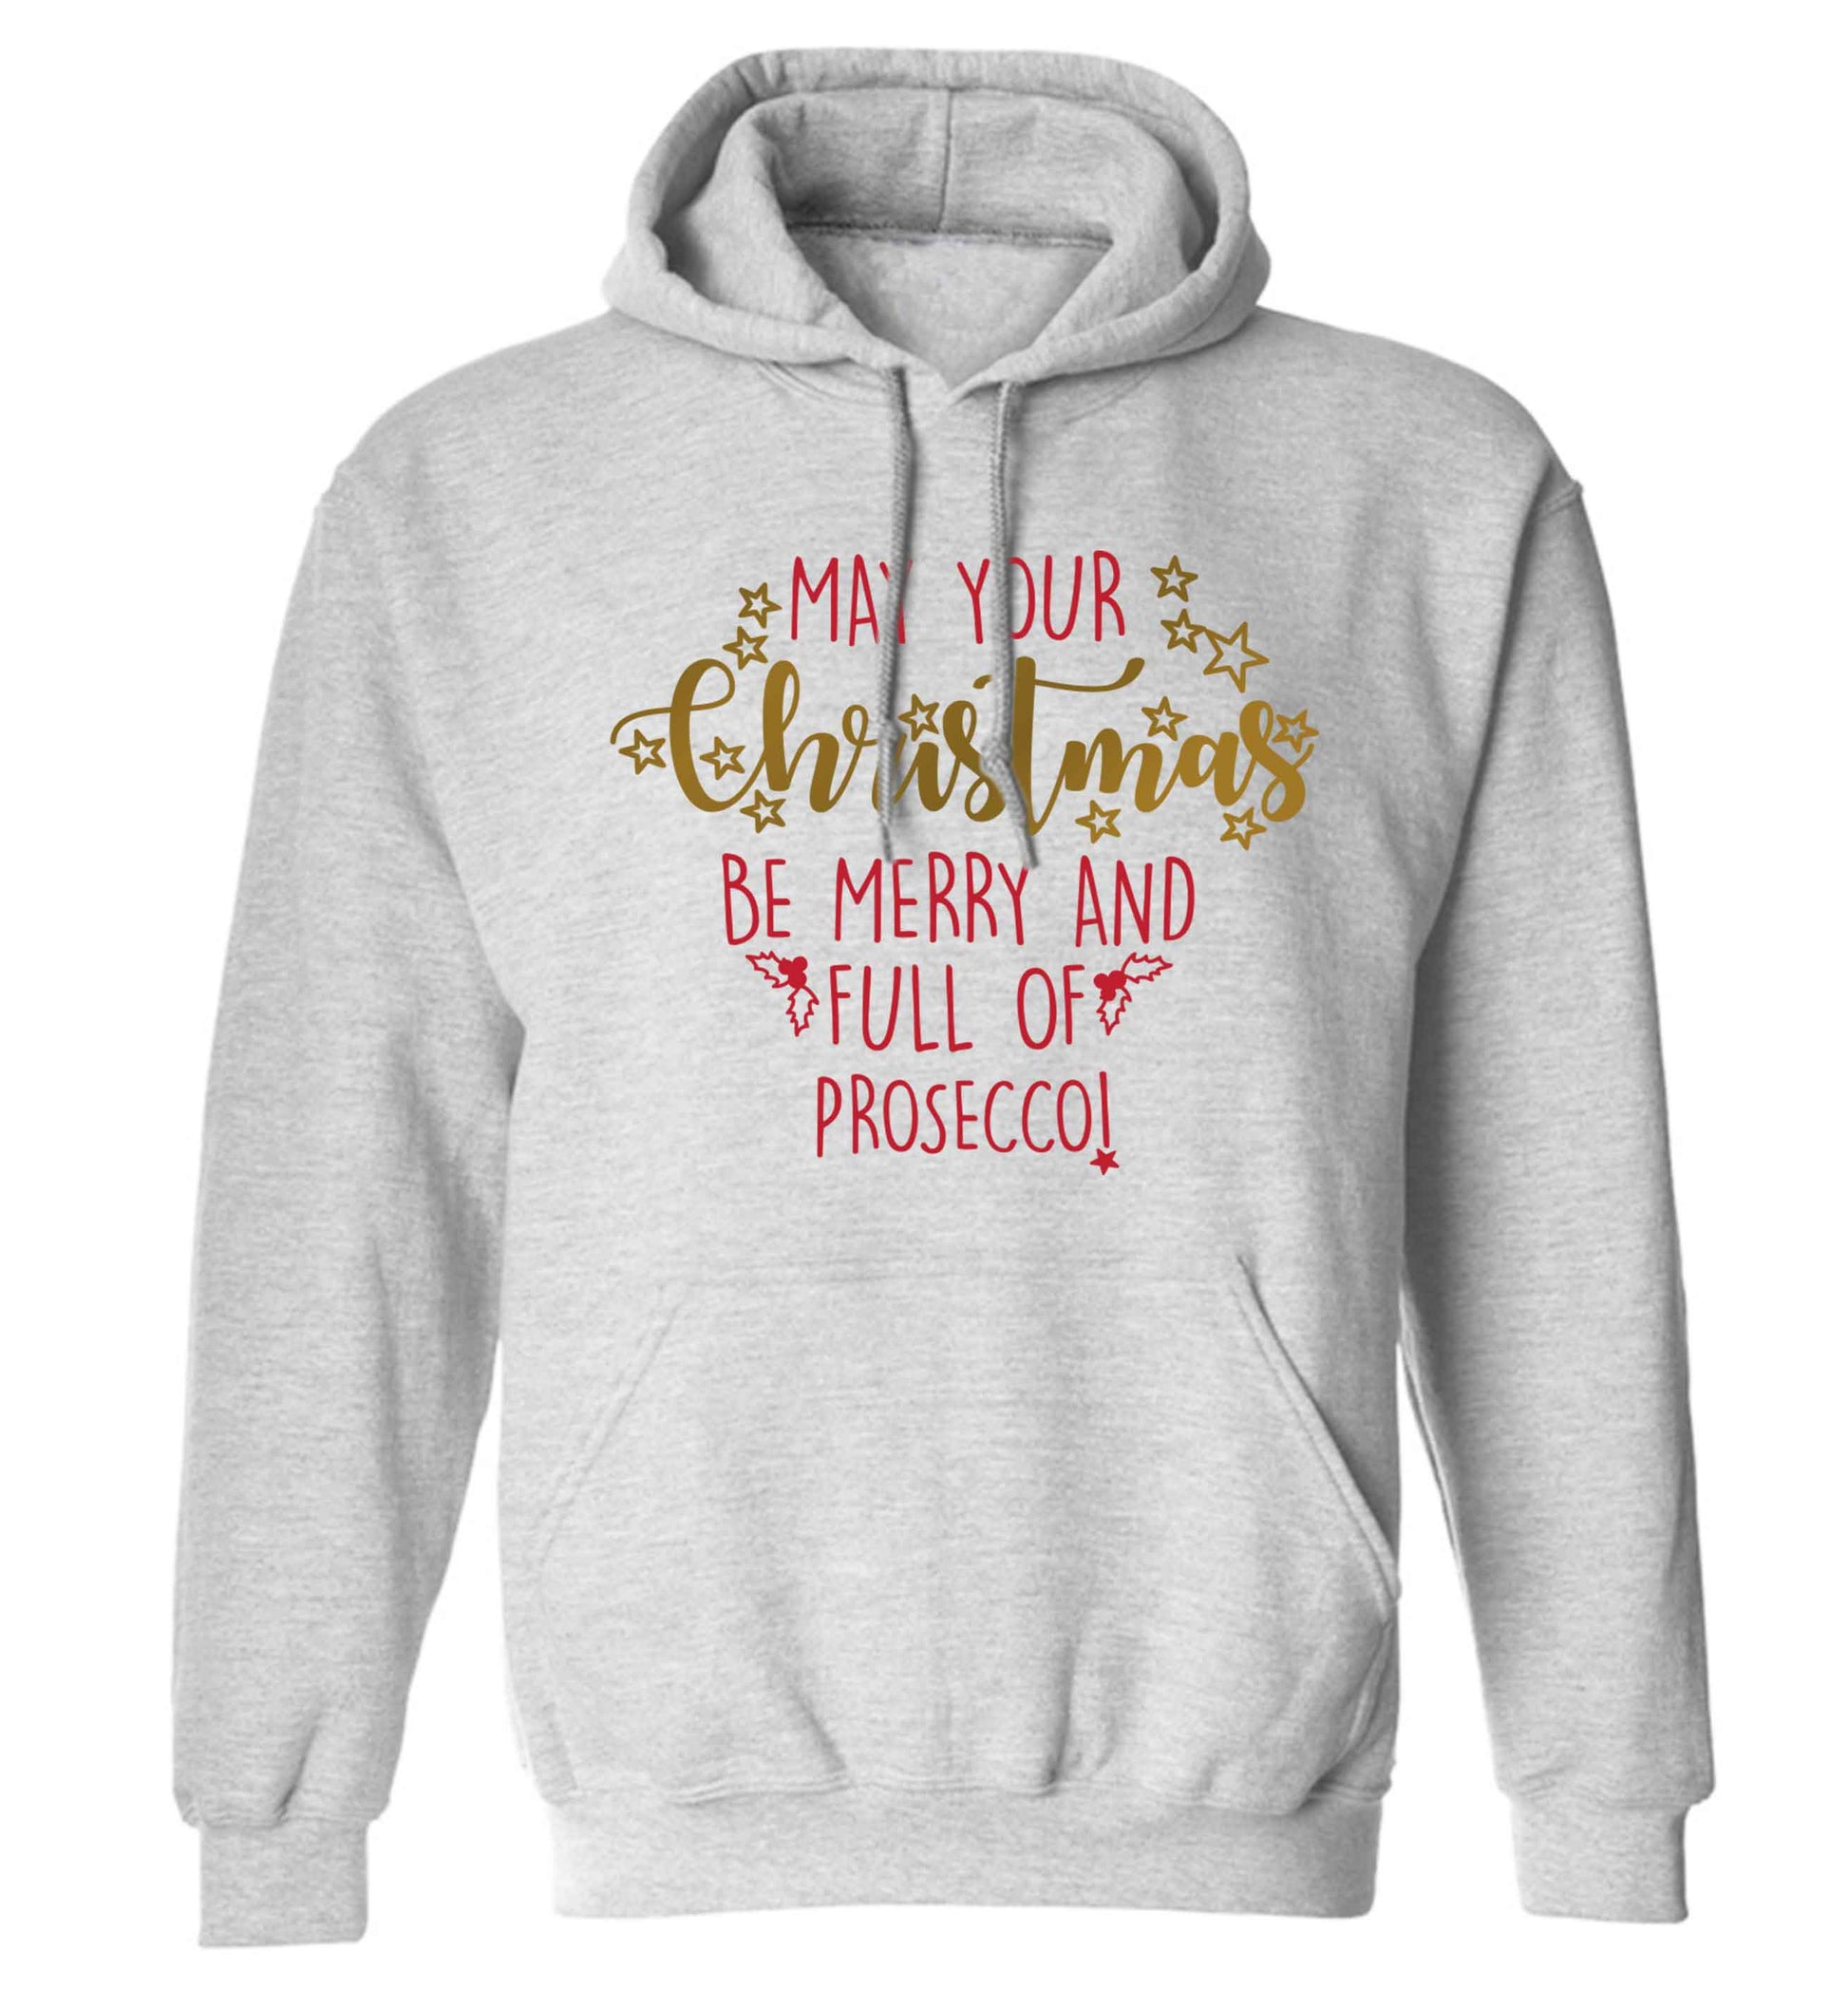 May your Christmas be merry and full of prosecco adults unisex grey hoodie 2XL